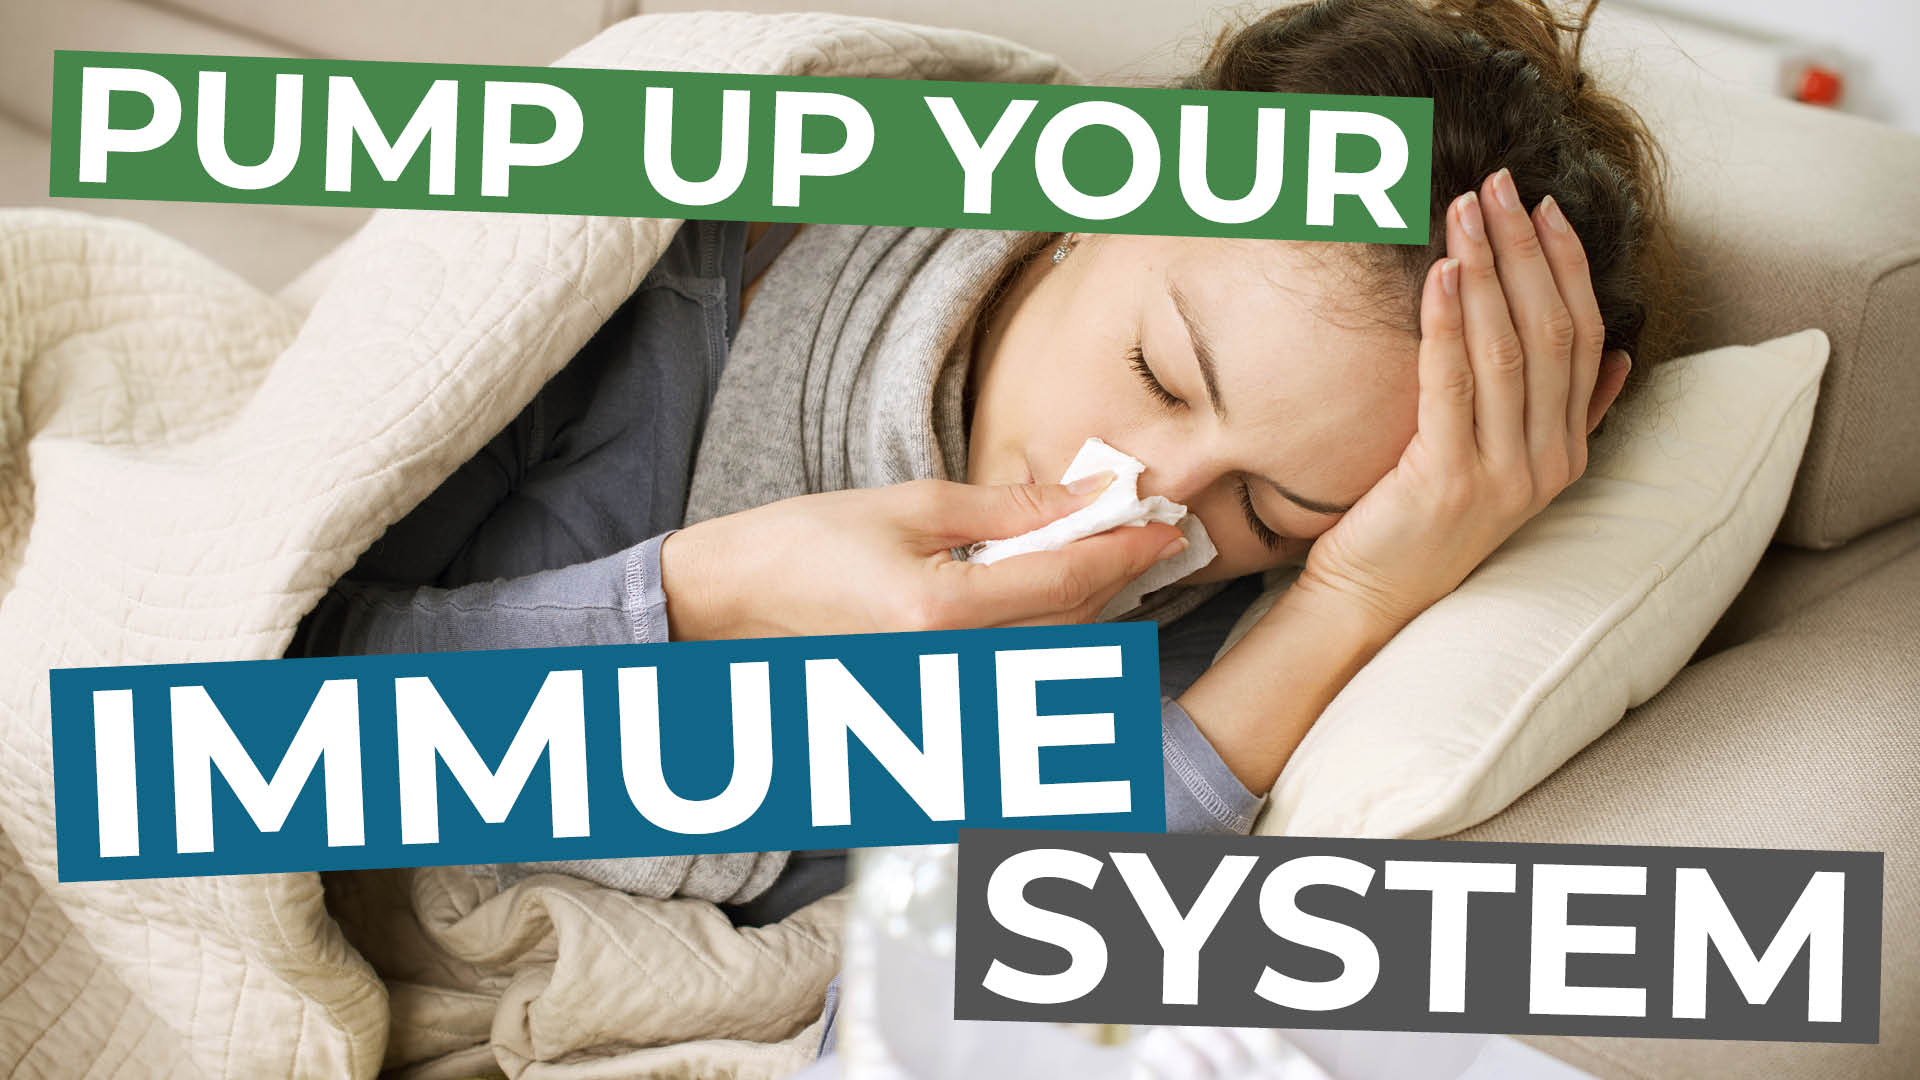 011 – Pump Up Your Immune System